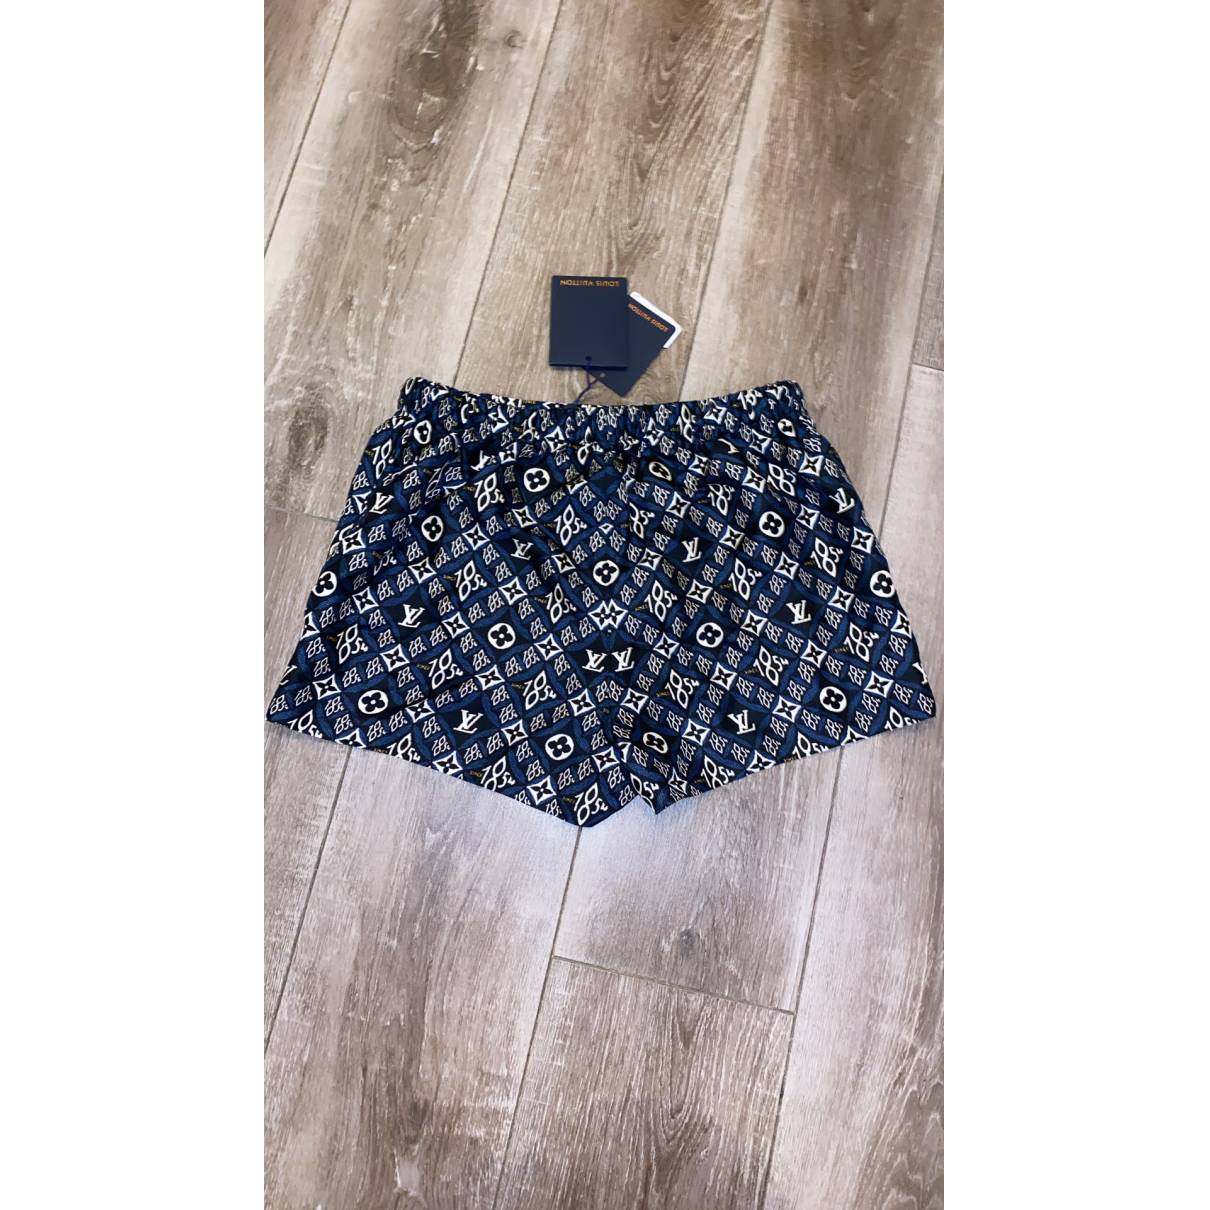 Louis Vuitton - Authenticated Short - Silk Blue for Women, Never Worn, with Tag